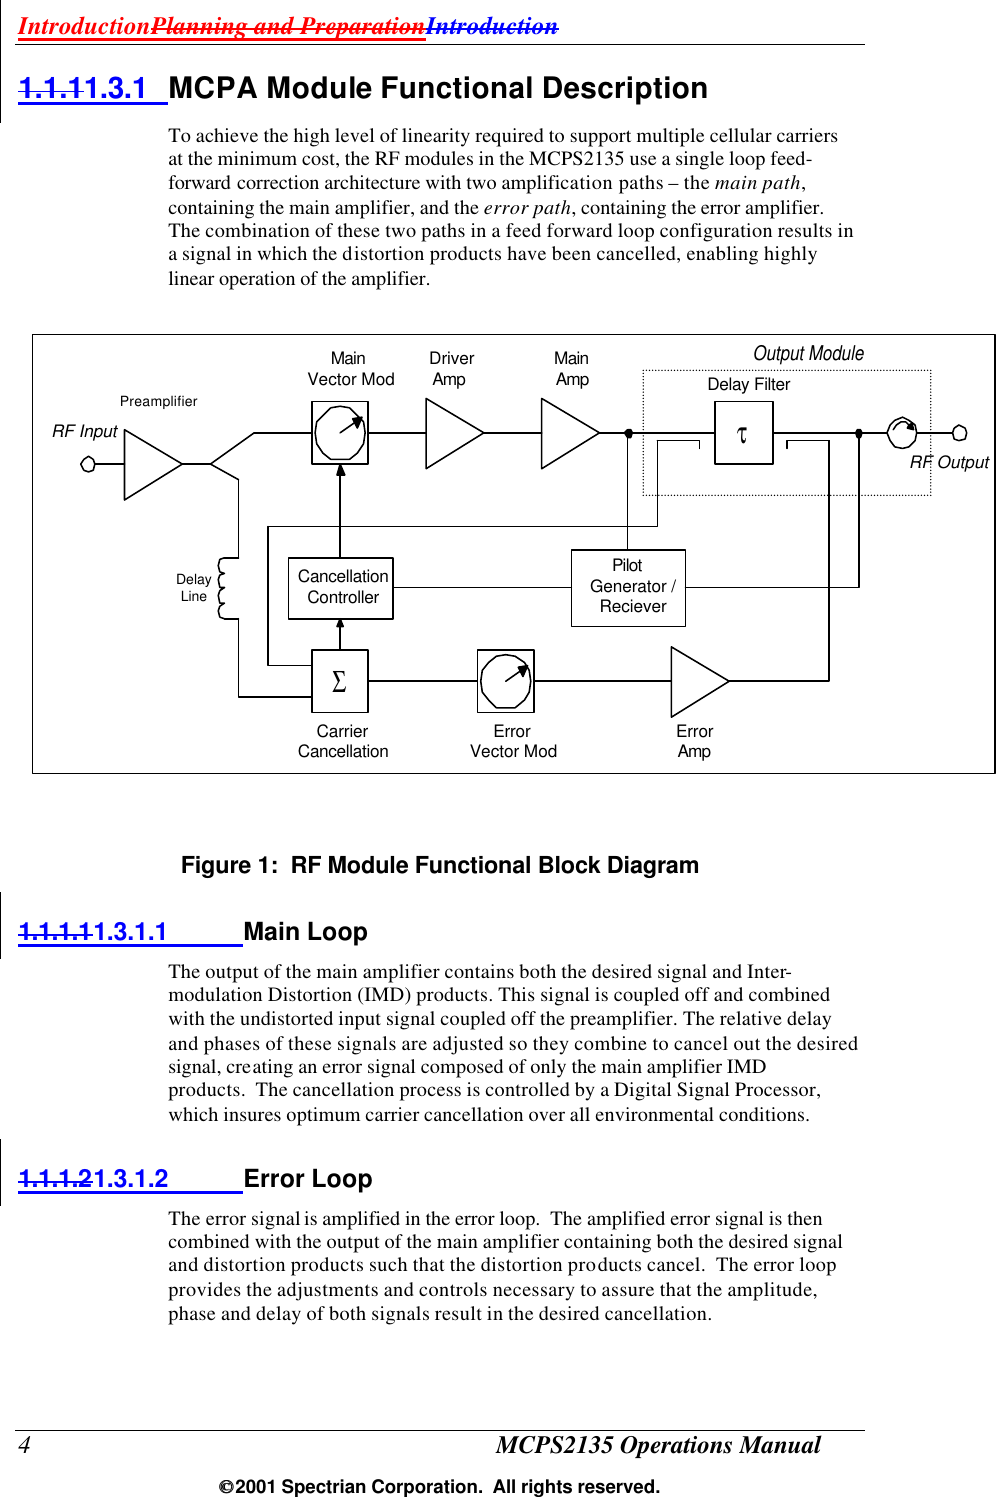 IntroductionPlanning and PreparationIntroduction 4 MCPS2135 Operations Manual  2001 Spectrian Corporation.  All rights reserved. 1.1.11.3.1 MCPA Module Functional Description To achieve the high level of linearity required to support multiple cellular carriers at the minimum cost, the RF modules in the MCPS2135 use a single loop feed-forward correction architecture with two amplification paths – the main path, containing the main amplifier, and the error path, containing the error amplifier. The combination of these two paths in a feed forward loop configuration results in a signal in which the distortion products have been cancelled, enabling highly linear operation of the amplifier.   Figure 1:  RF Module Functional Block Diagram 1.1.1.11.3.1.1 Main Loop The output of the main amplifier contains both the desired signal and Inter-modulation Distortion (IMD) products. This signal is coupled off and combined with the undistorted input signal coupled off the preamplifier. The relative delay and phases of these signals are adjusted so they combine to cancel out the desired signal, creating an error signal composed of only the main amplifier IMD products.  The cancellation process is controlled by a Digital Signal Processor, which insures optimum carrier cancellation over all environmental conditions. 1.1.1.21.3.1.2 Error Loop The error signal is amplified in the error loop.  The amplified error signal is then combined with the output of the main amplifier containing both the desired signal and distortion products such that the distortion products cancel.  The error loop provides the adjustments and controls necessary to assure that the amplitude, phase and delay of both signals result in the desired cancellation.   MainVector ModDriverAmpMainAmp Delay FilterOutput ModulePilotGenerator /RecieverCancellationControllerCarrierCancellation ErrorVector ModΣτPreamplifierDelayLineErrorAmpRF InputRF Output